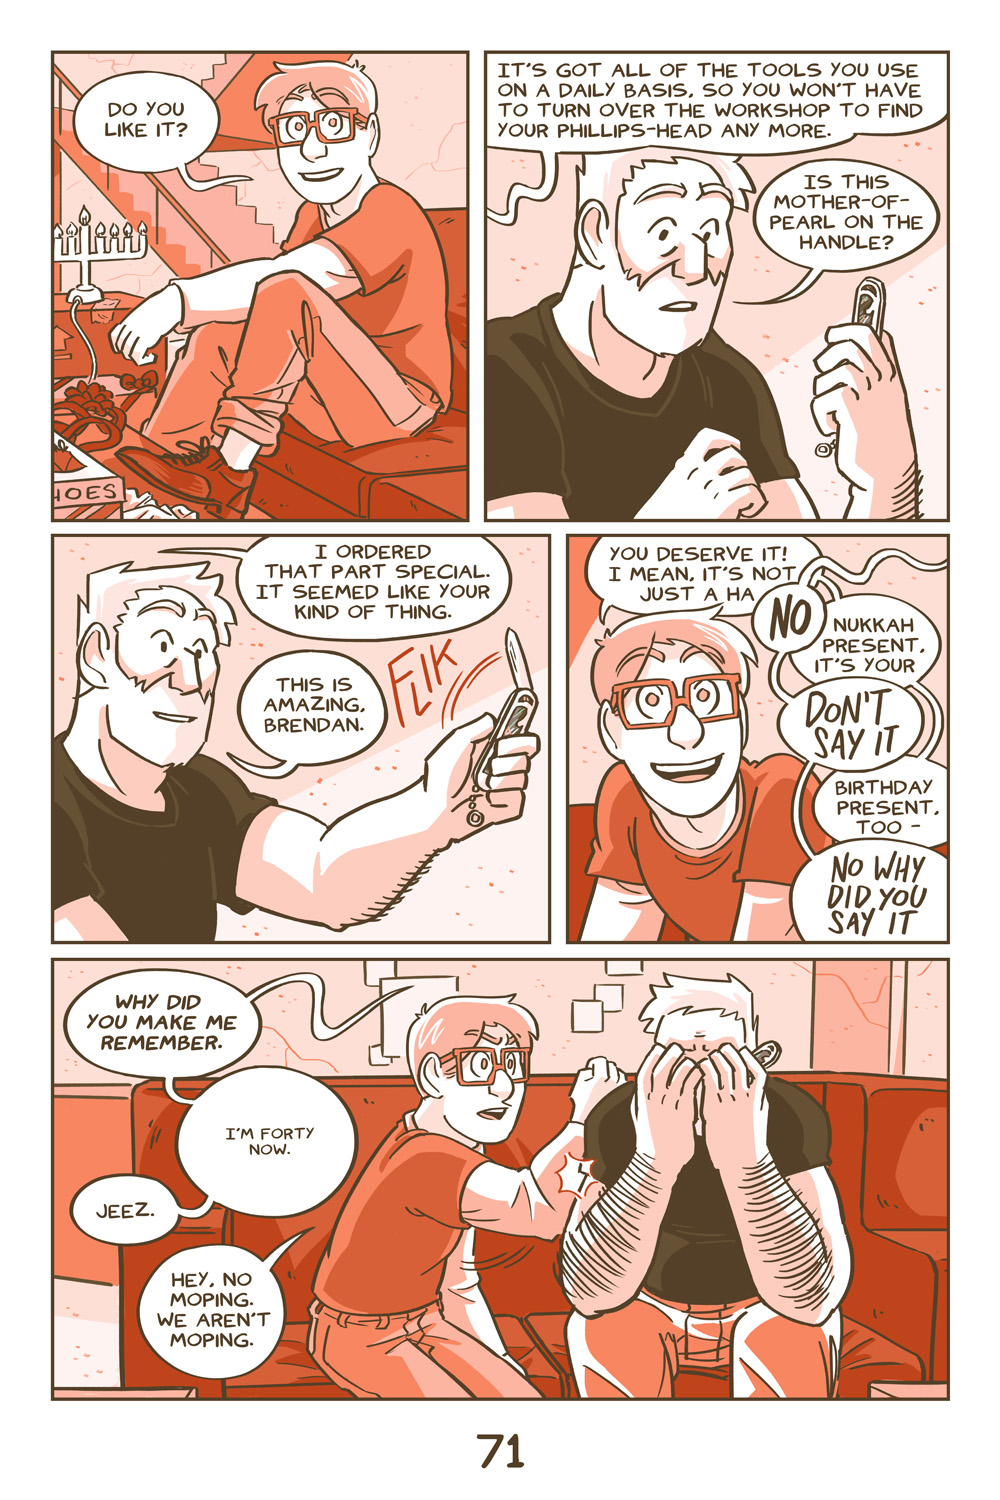 Chapter 2, Page 71